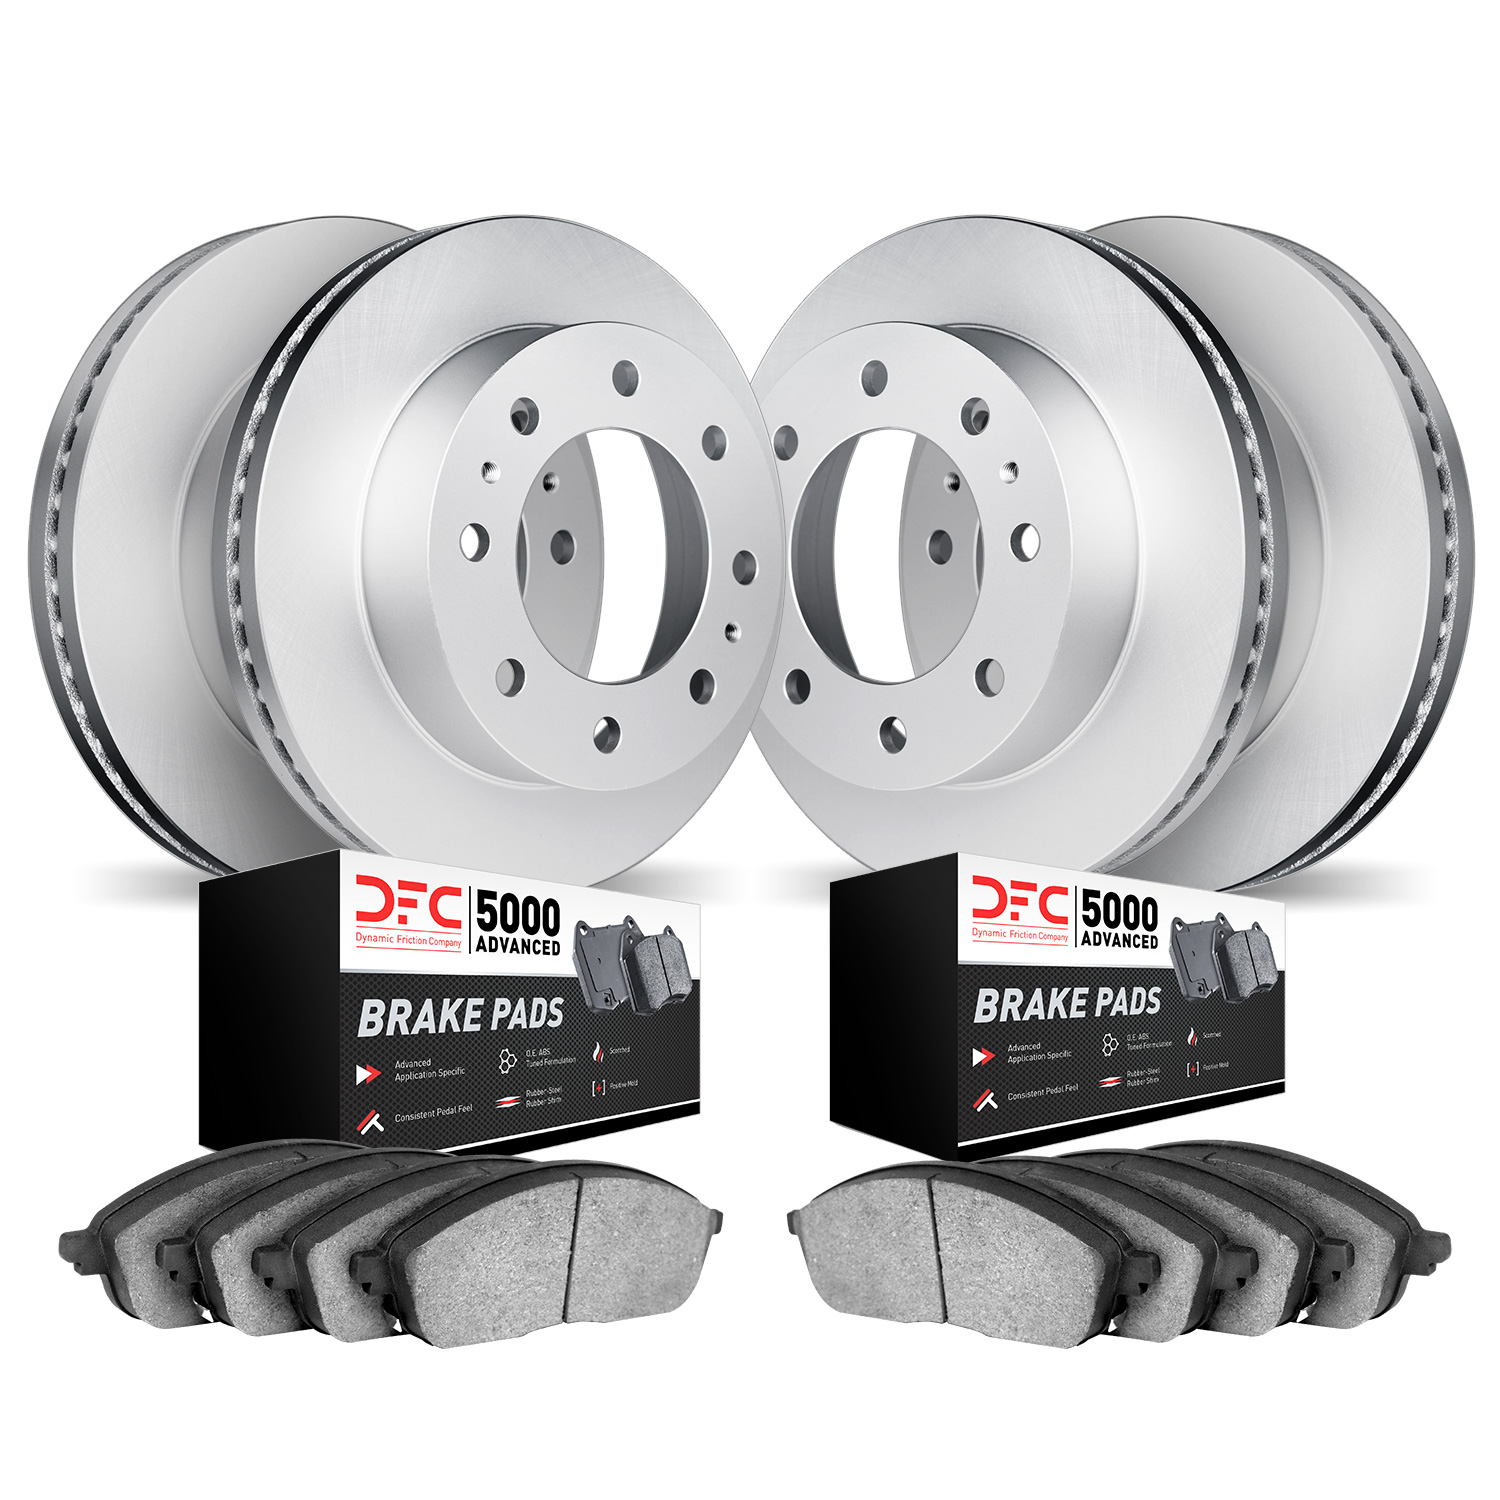 4504-48017 Geospec Brake Rotors w/5000 Advanced Brake Pads Kit, 2003-2017 GM, Position: Front and Rear